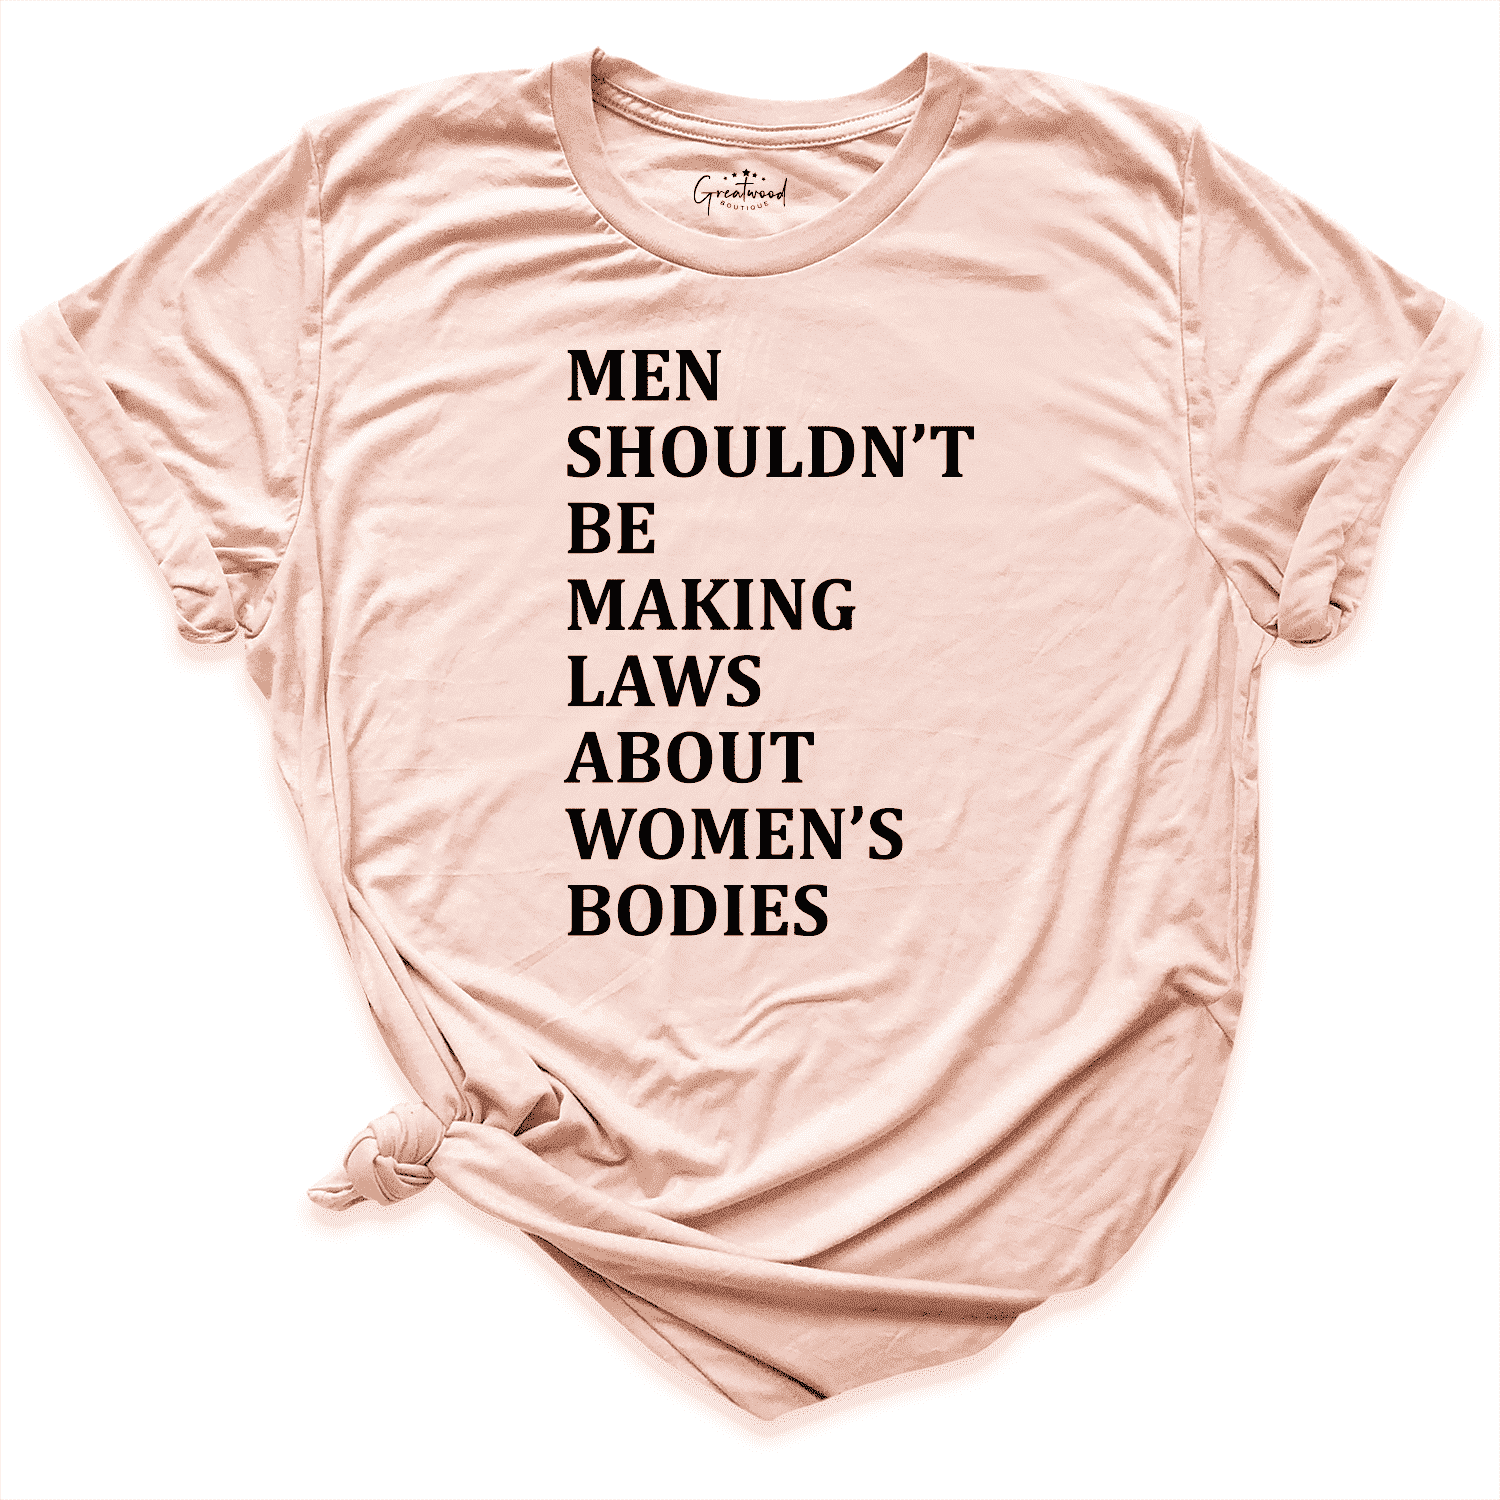 Men Shouldn't Be Making Laws About Women's Bodies peach - Greatwood Boutique